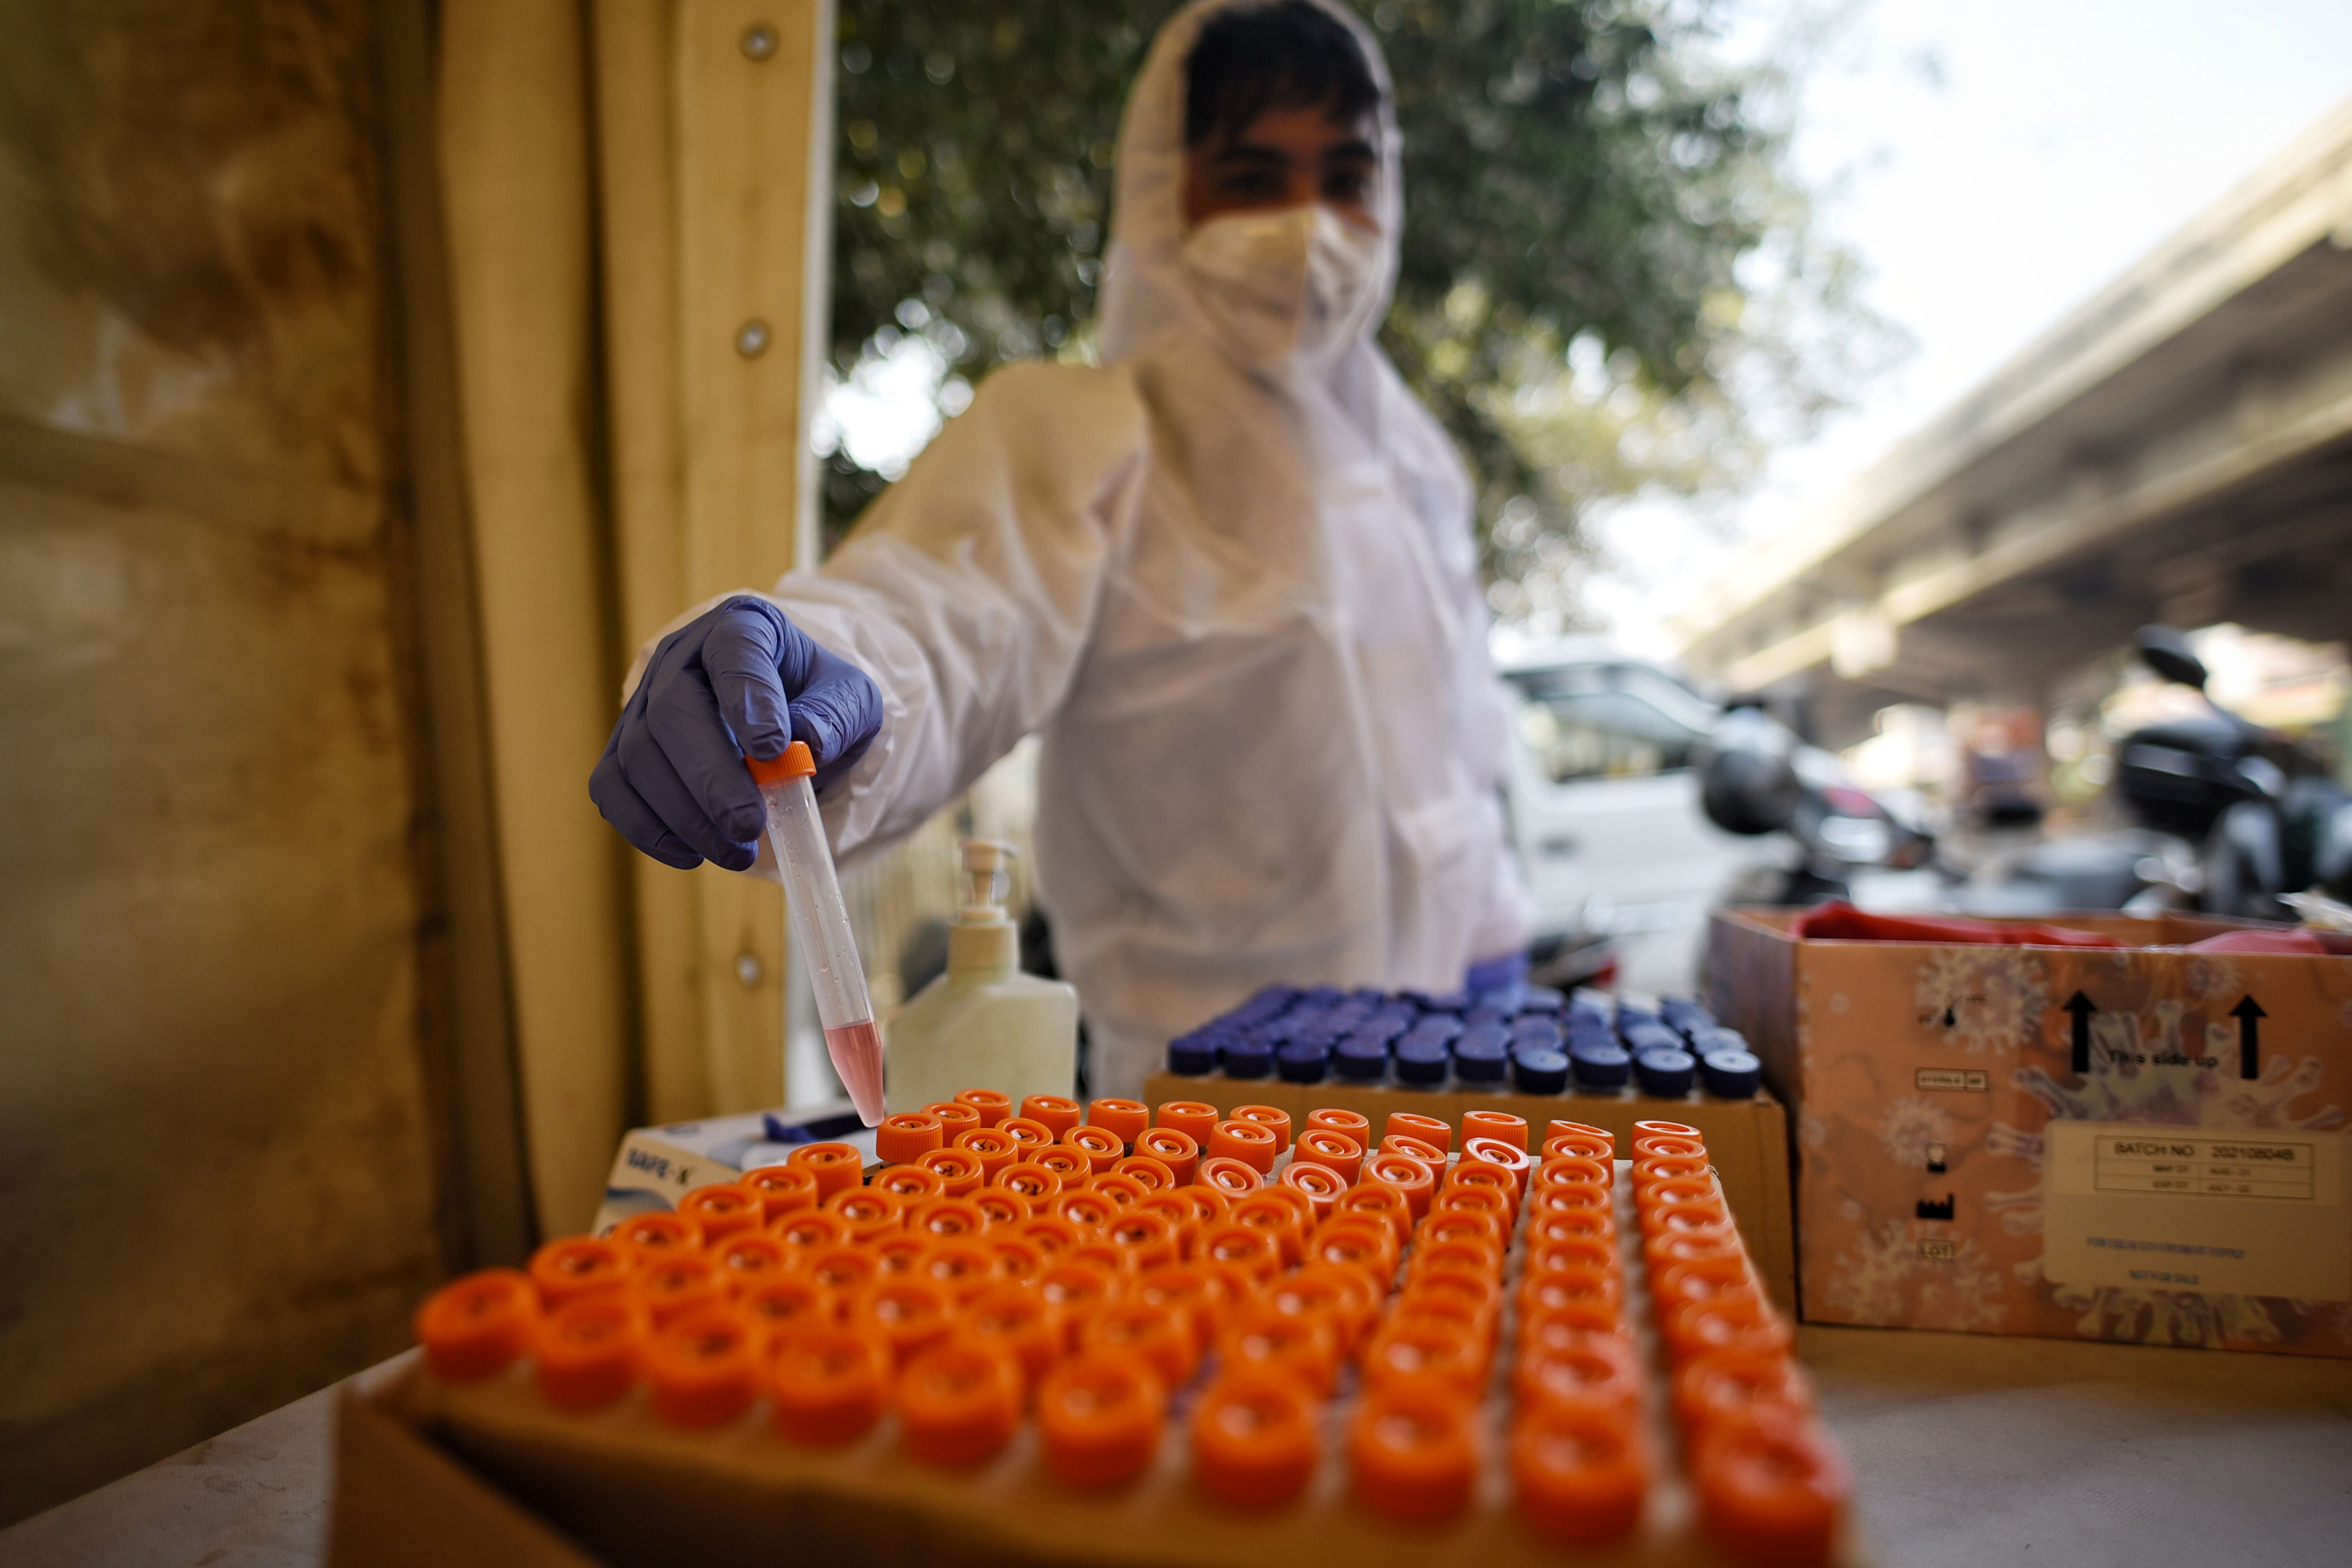 A health worker collects samples for Covid-19 testing at Shahdara, New Delhi, India, on December 18, 2021